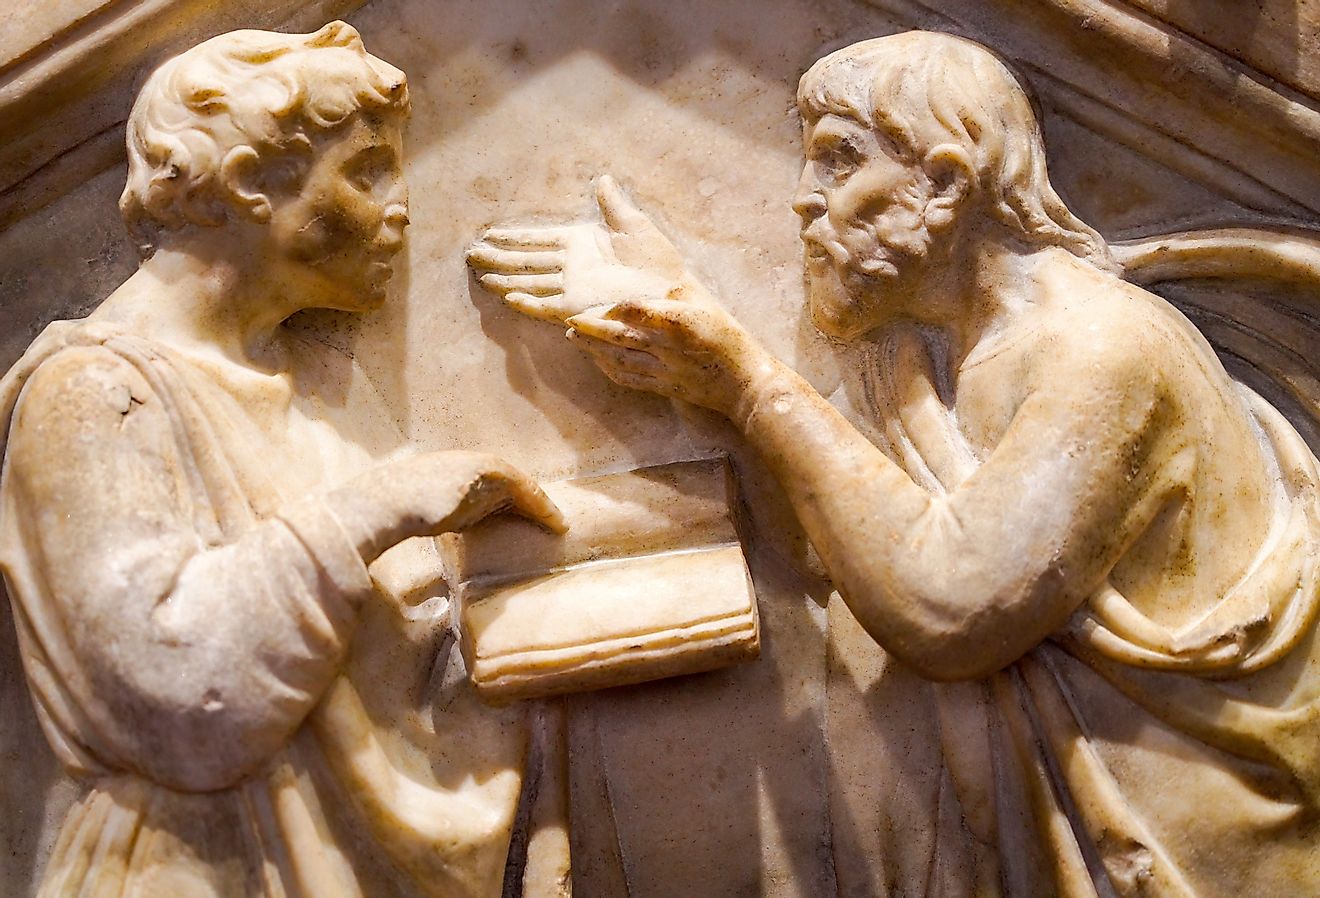 Low relief sculpture depicting Plato and Aristotle arguing by Andrea Pisano, adorning the external wall of Florence Cathedral. Image credit Krikkiat via Shutterstock